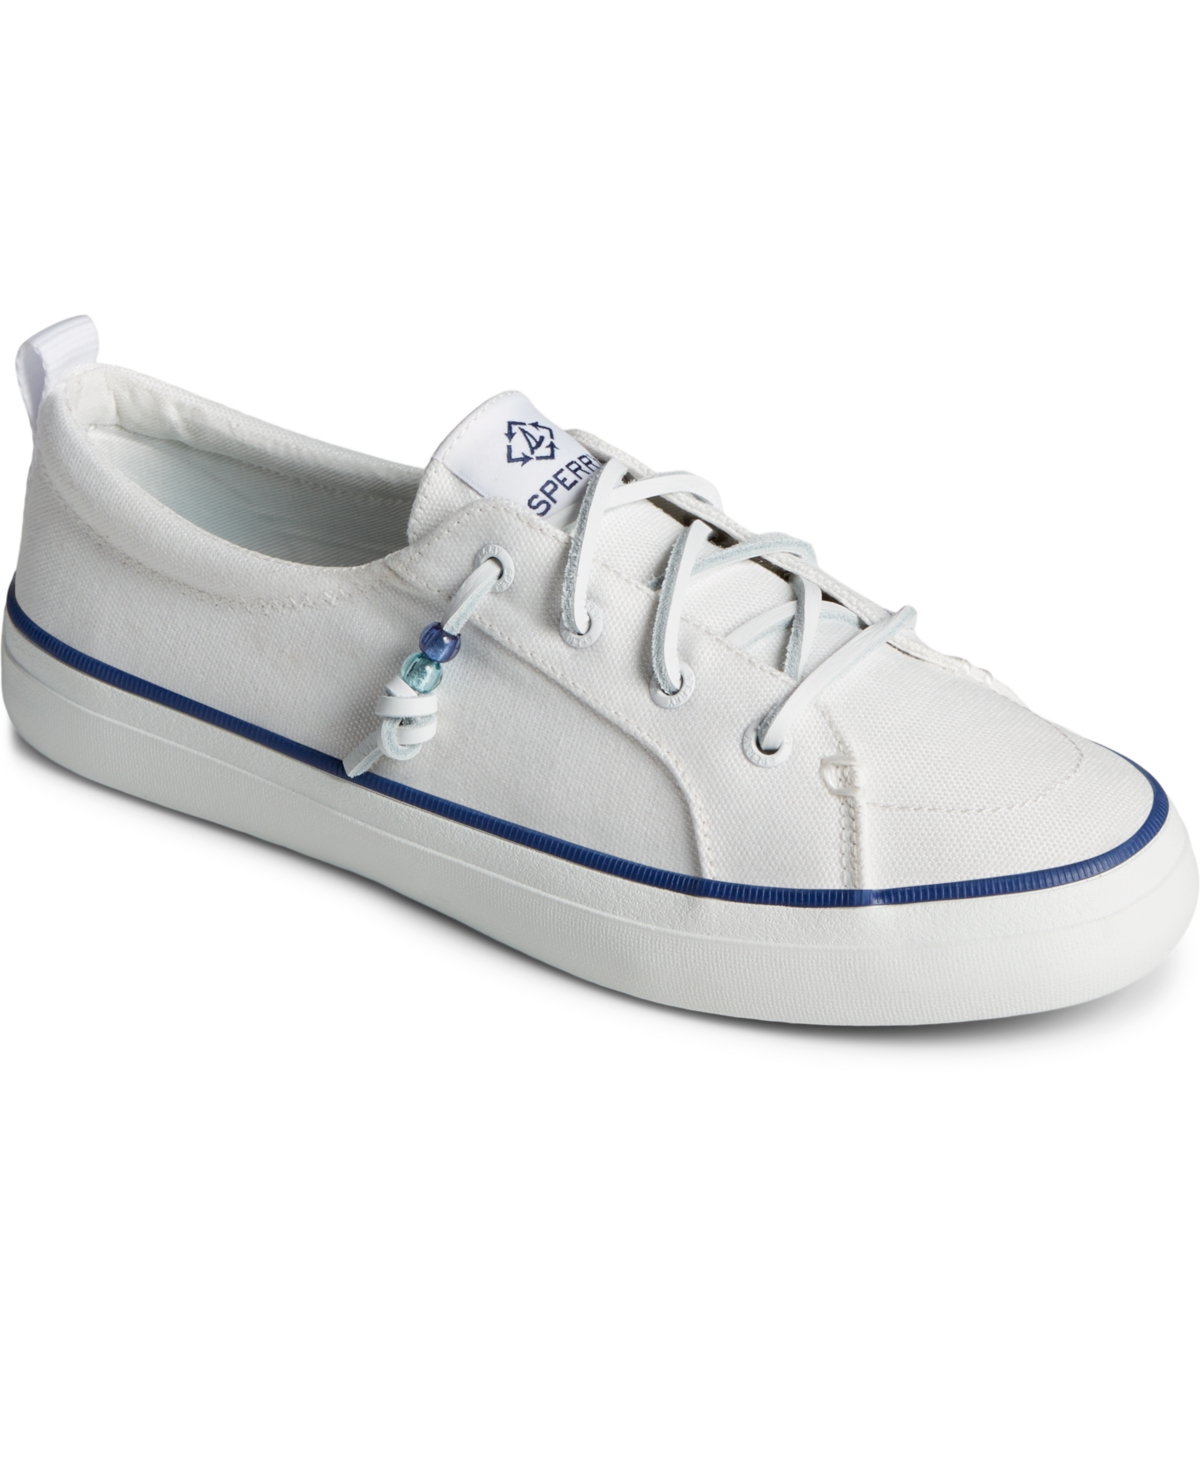 SPERRY WOMEN'S CREST VIBE TEXTILE SNEAKERS WOMEN'S SHOES